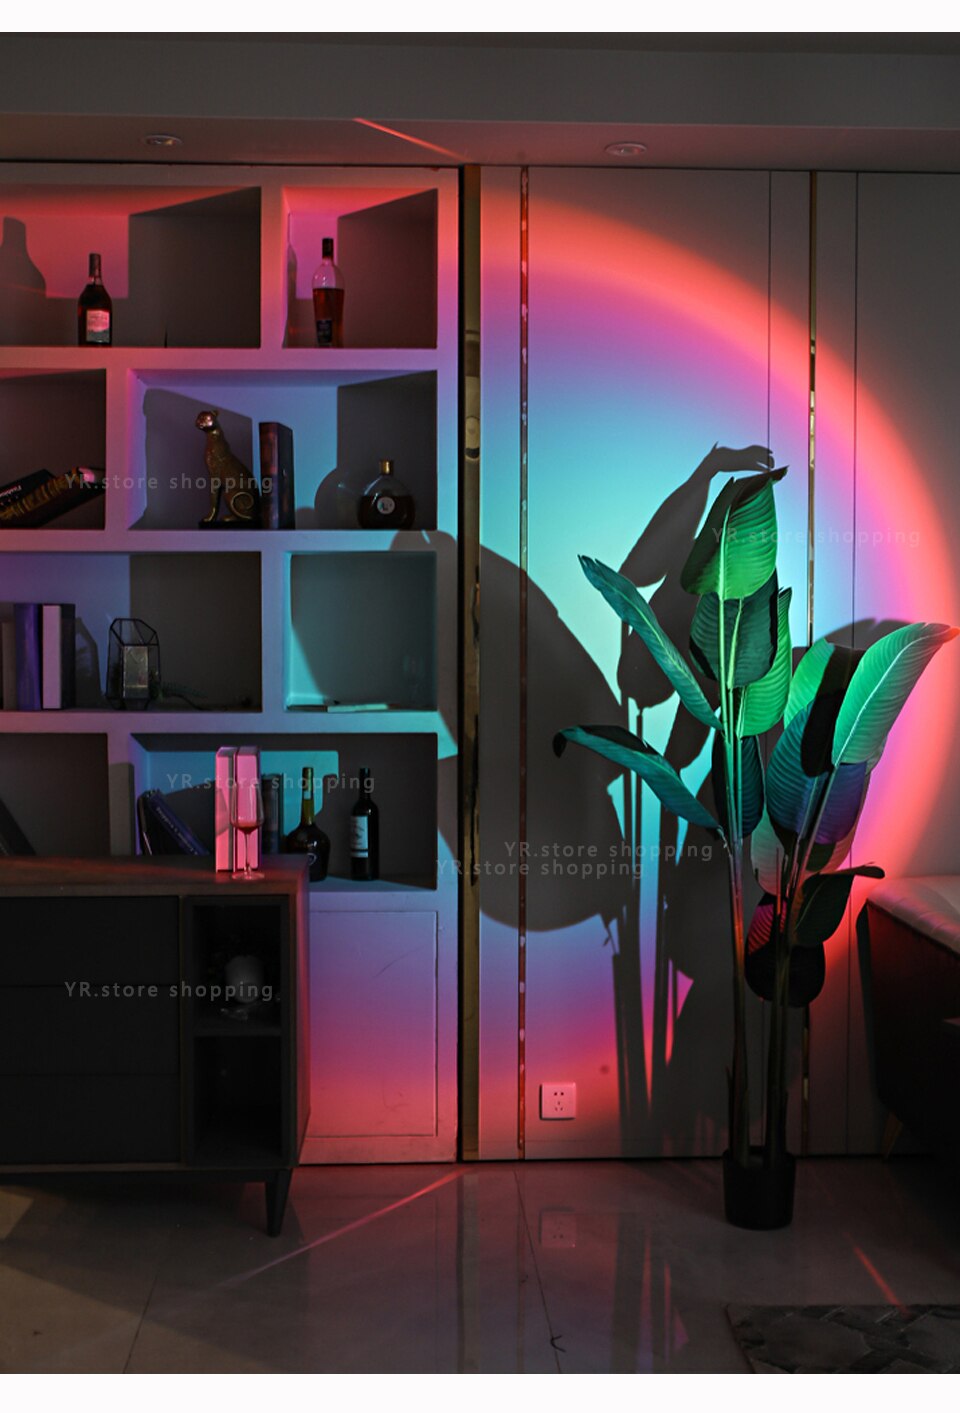 LED Rainbow Projector Night Light Sunset Atmosphere Lamp Home Coffe Shop Background Wall Decoration Colorful Lamp USB Floor Lamp